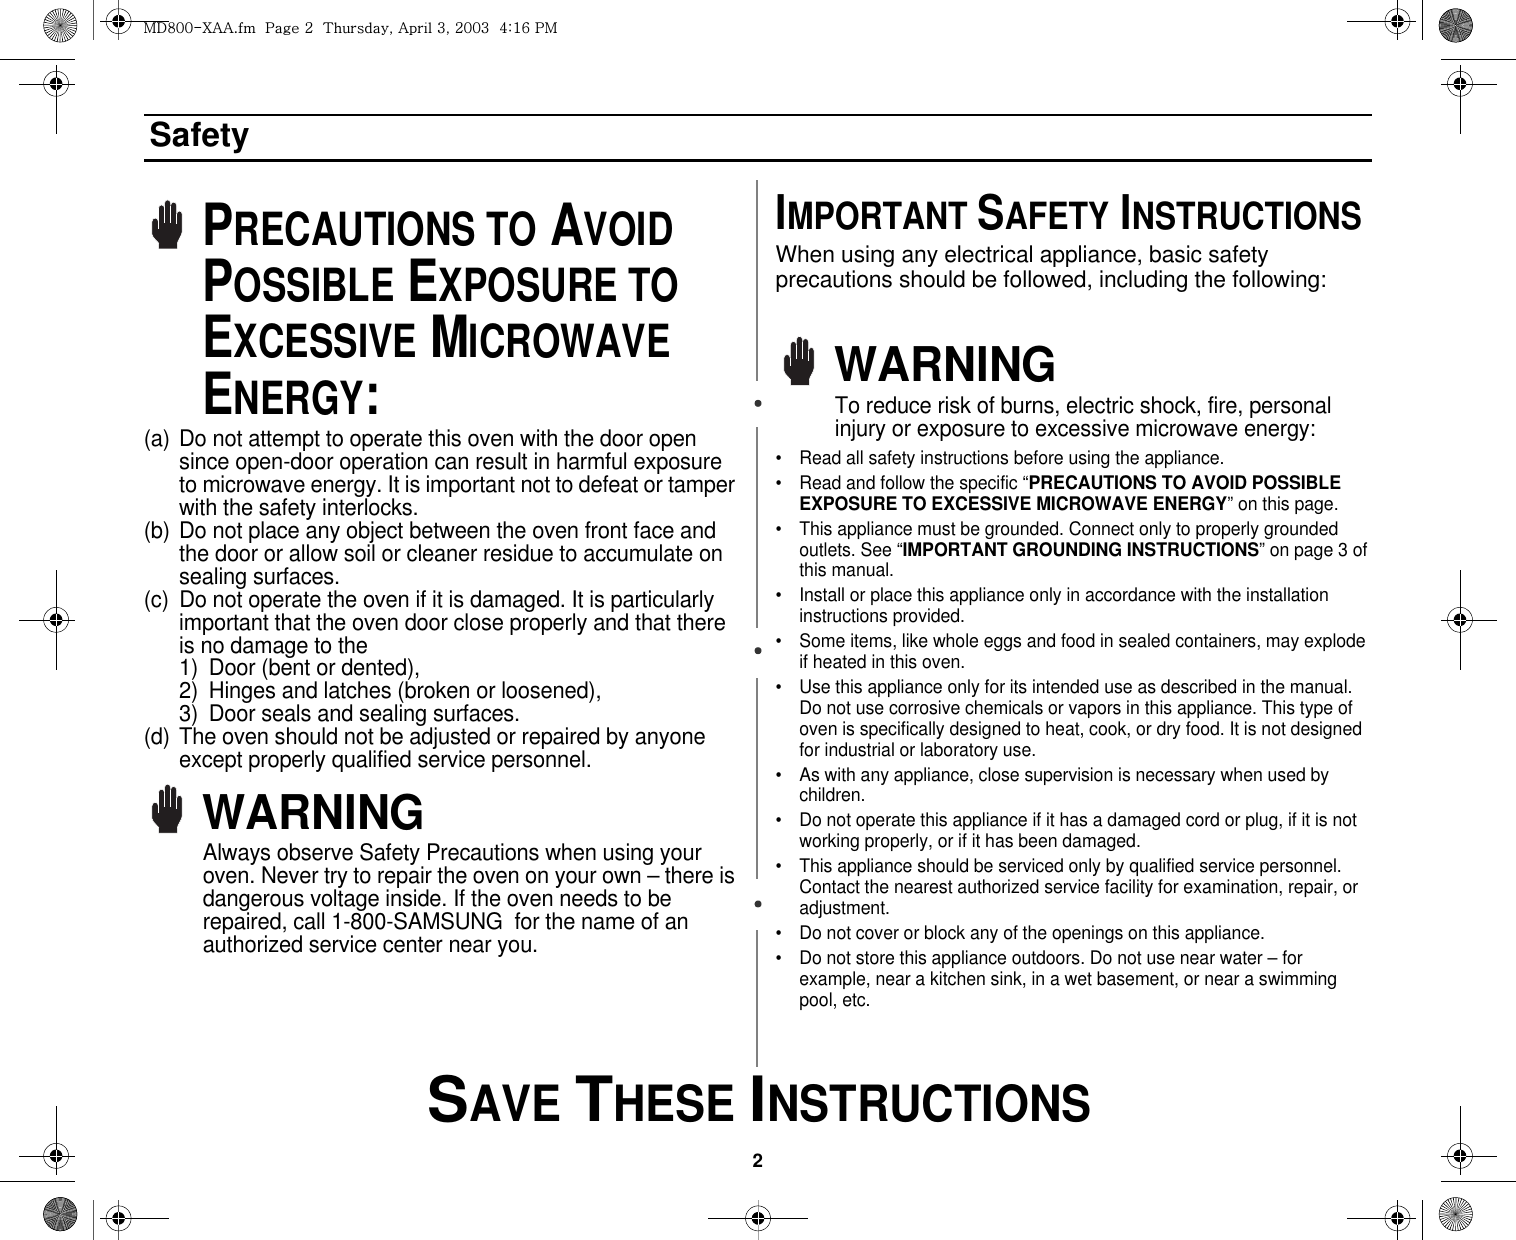 2 SAVE THESE INSTRUCTIONSSafetyPRECAUTIONS TO AVOID POSSIBLE EXPOSURE TO EXCESSIVE MICROWAVE ENERGY:(a) Do not attempt to operate this oven with the door open since open-door operation can result in harmful exposure to microwave energy. It is important not to defeat or tamper with the safety interlocks.(b) Do not place any object between the oven front face and the door or allow soil or cleaner residue to accumulate on sealing surfaces.(c) Do not operate the oven if it is damaged. It is particularly important that the oven door close properly and that there is no damage to the 1) Door (bent or dented), 2) Hinges and latches (broken or loosened), 3) Door seals and sealing surfaces.(d) The oven should not be adjusted or repaired by anyone except properly qualified service personnel.WARNINGAlways observe Safety Precautions when using your oven. Never try to repair the oven on your own – there is dangerous voltage inside. If the oven needs to be repaired, call 1-800-SAMSUNG  for the name of an authorized service center near you.IMPORTANT SAFETY INSTRUCTIONSWhen using any electrical appliance, basic safety precautions should be followed, including the following:WARNINGTo reduce risk of burns, electric shock, fire, personal injury or exposure to excessive microwave energy:• Read all safety instructions before using the appliance.• Read and follow the specific “PRECAUTIONS TO AVOID POSSIBLE EXPOSURE TO EXCESSIVE MICROWAVE ENERGY” on this page.• This appliance must be grounded. Connect only to properly grounded outlets. See “IMPORTANT GROUNDING INSTRUCTIONS” on page 3 of this manual. • Install or place this appliance only in accordance with the installation instructions provided.• Some items, like whole eggs and food in sealed containers, may explode if heated in this oven.• Use this appliance only for its intended use as described in the manual. Do not use corrosive chemicals or vapors in this appliance. This type of oven is specifically designed to heat, cook, or dry food. It is not designed for industrial or laboratory use.• As with any appliance, close supervision is necessary when used by children.• Do not operate this appliance if it has a damaged cord or plug, if it is not working properly, or if it has been damaged.• This appliance should be serviced only by qualified service personnel. Contact the nearest authorized service facility for examination, repair, or adjustment.• Do not cover or block any of the openings on this appliance.• Do not store this appliance outdoors. Do not use near water – for example, near a kitchen sink, in a wet basement, or near a swimming pool, etc. tk_WWThhUGGwGYGG{SGhGZSGYWWZGG[aX]Gwt